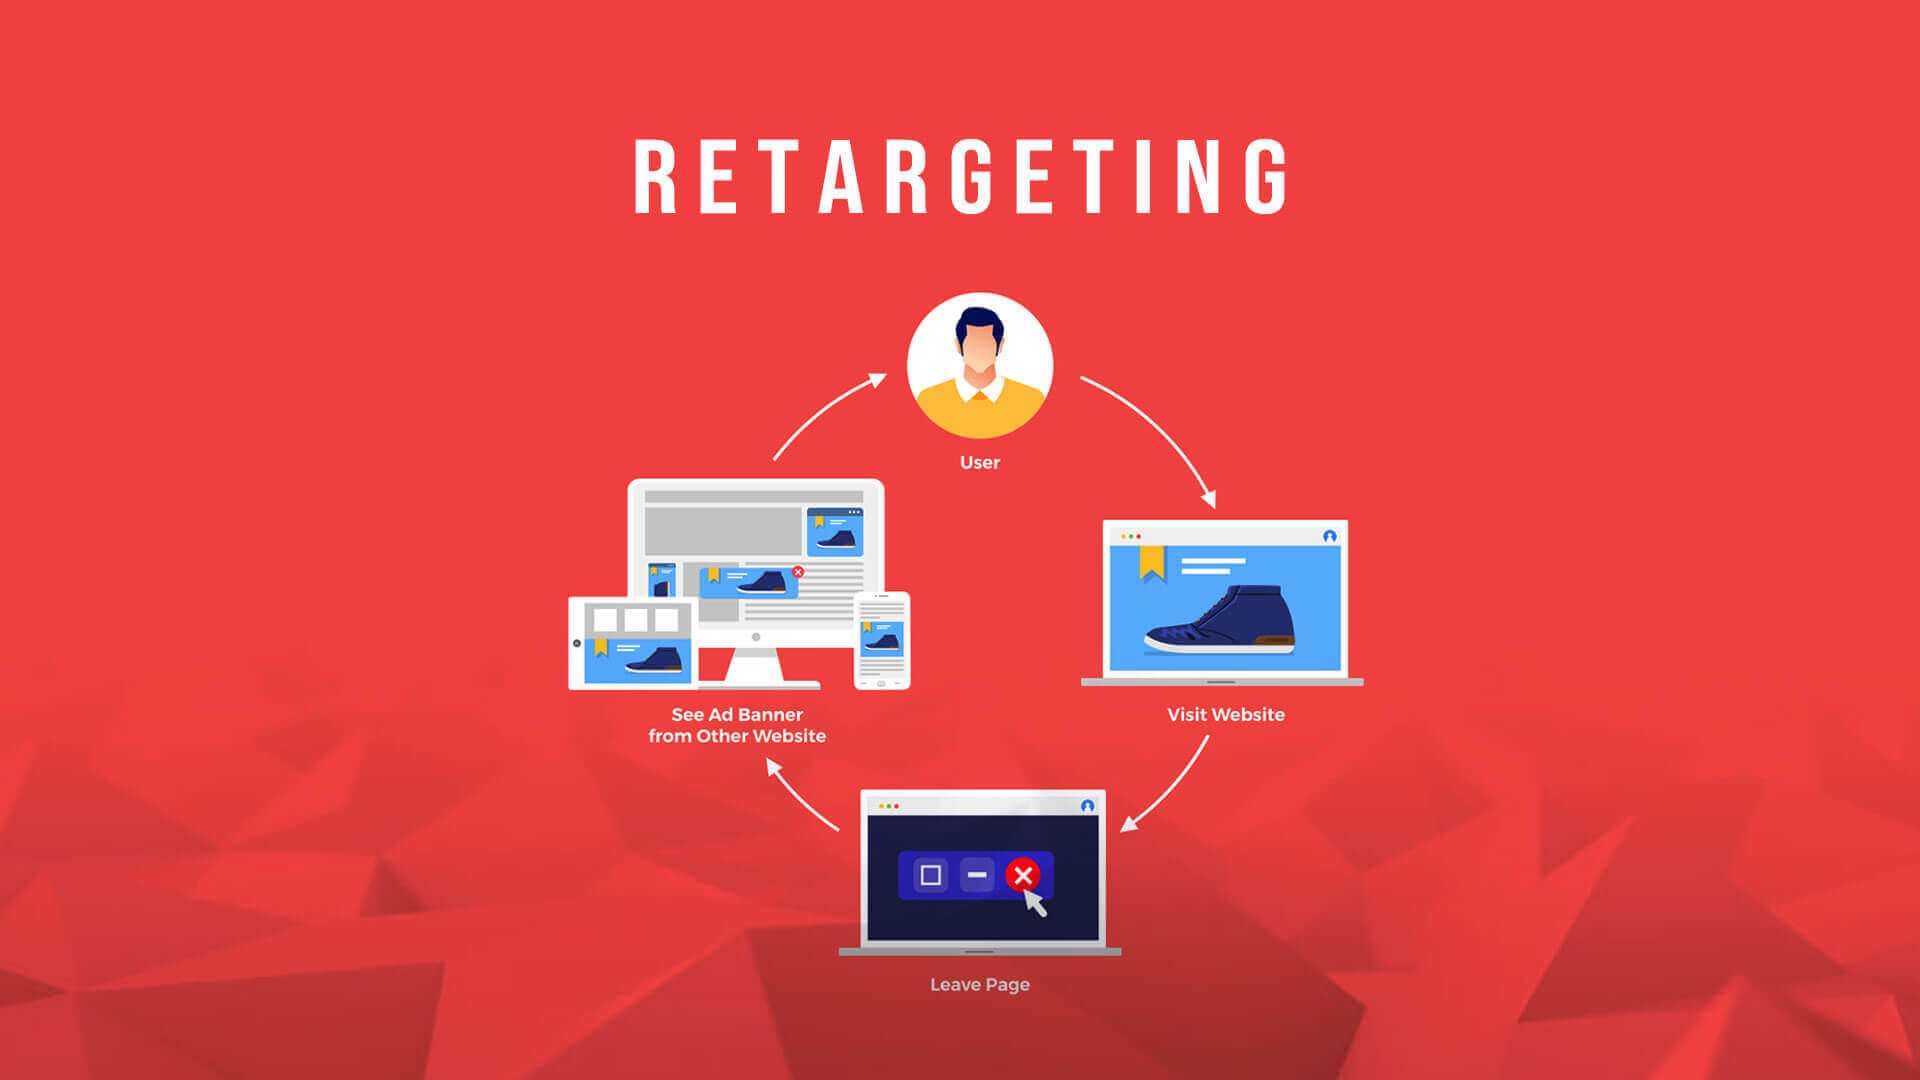 Re-targeting as a marketing tool to sell our SaaS product more